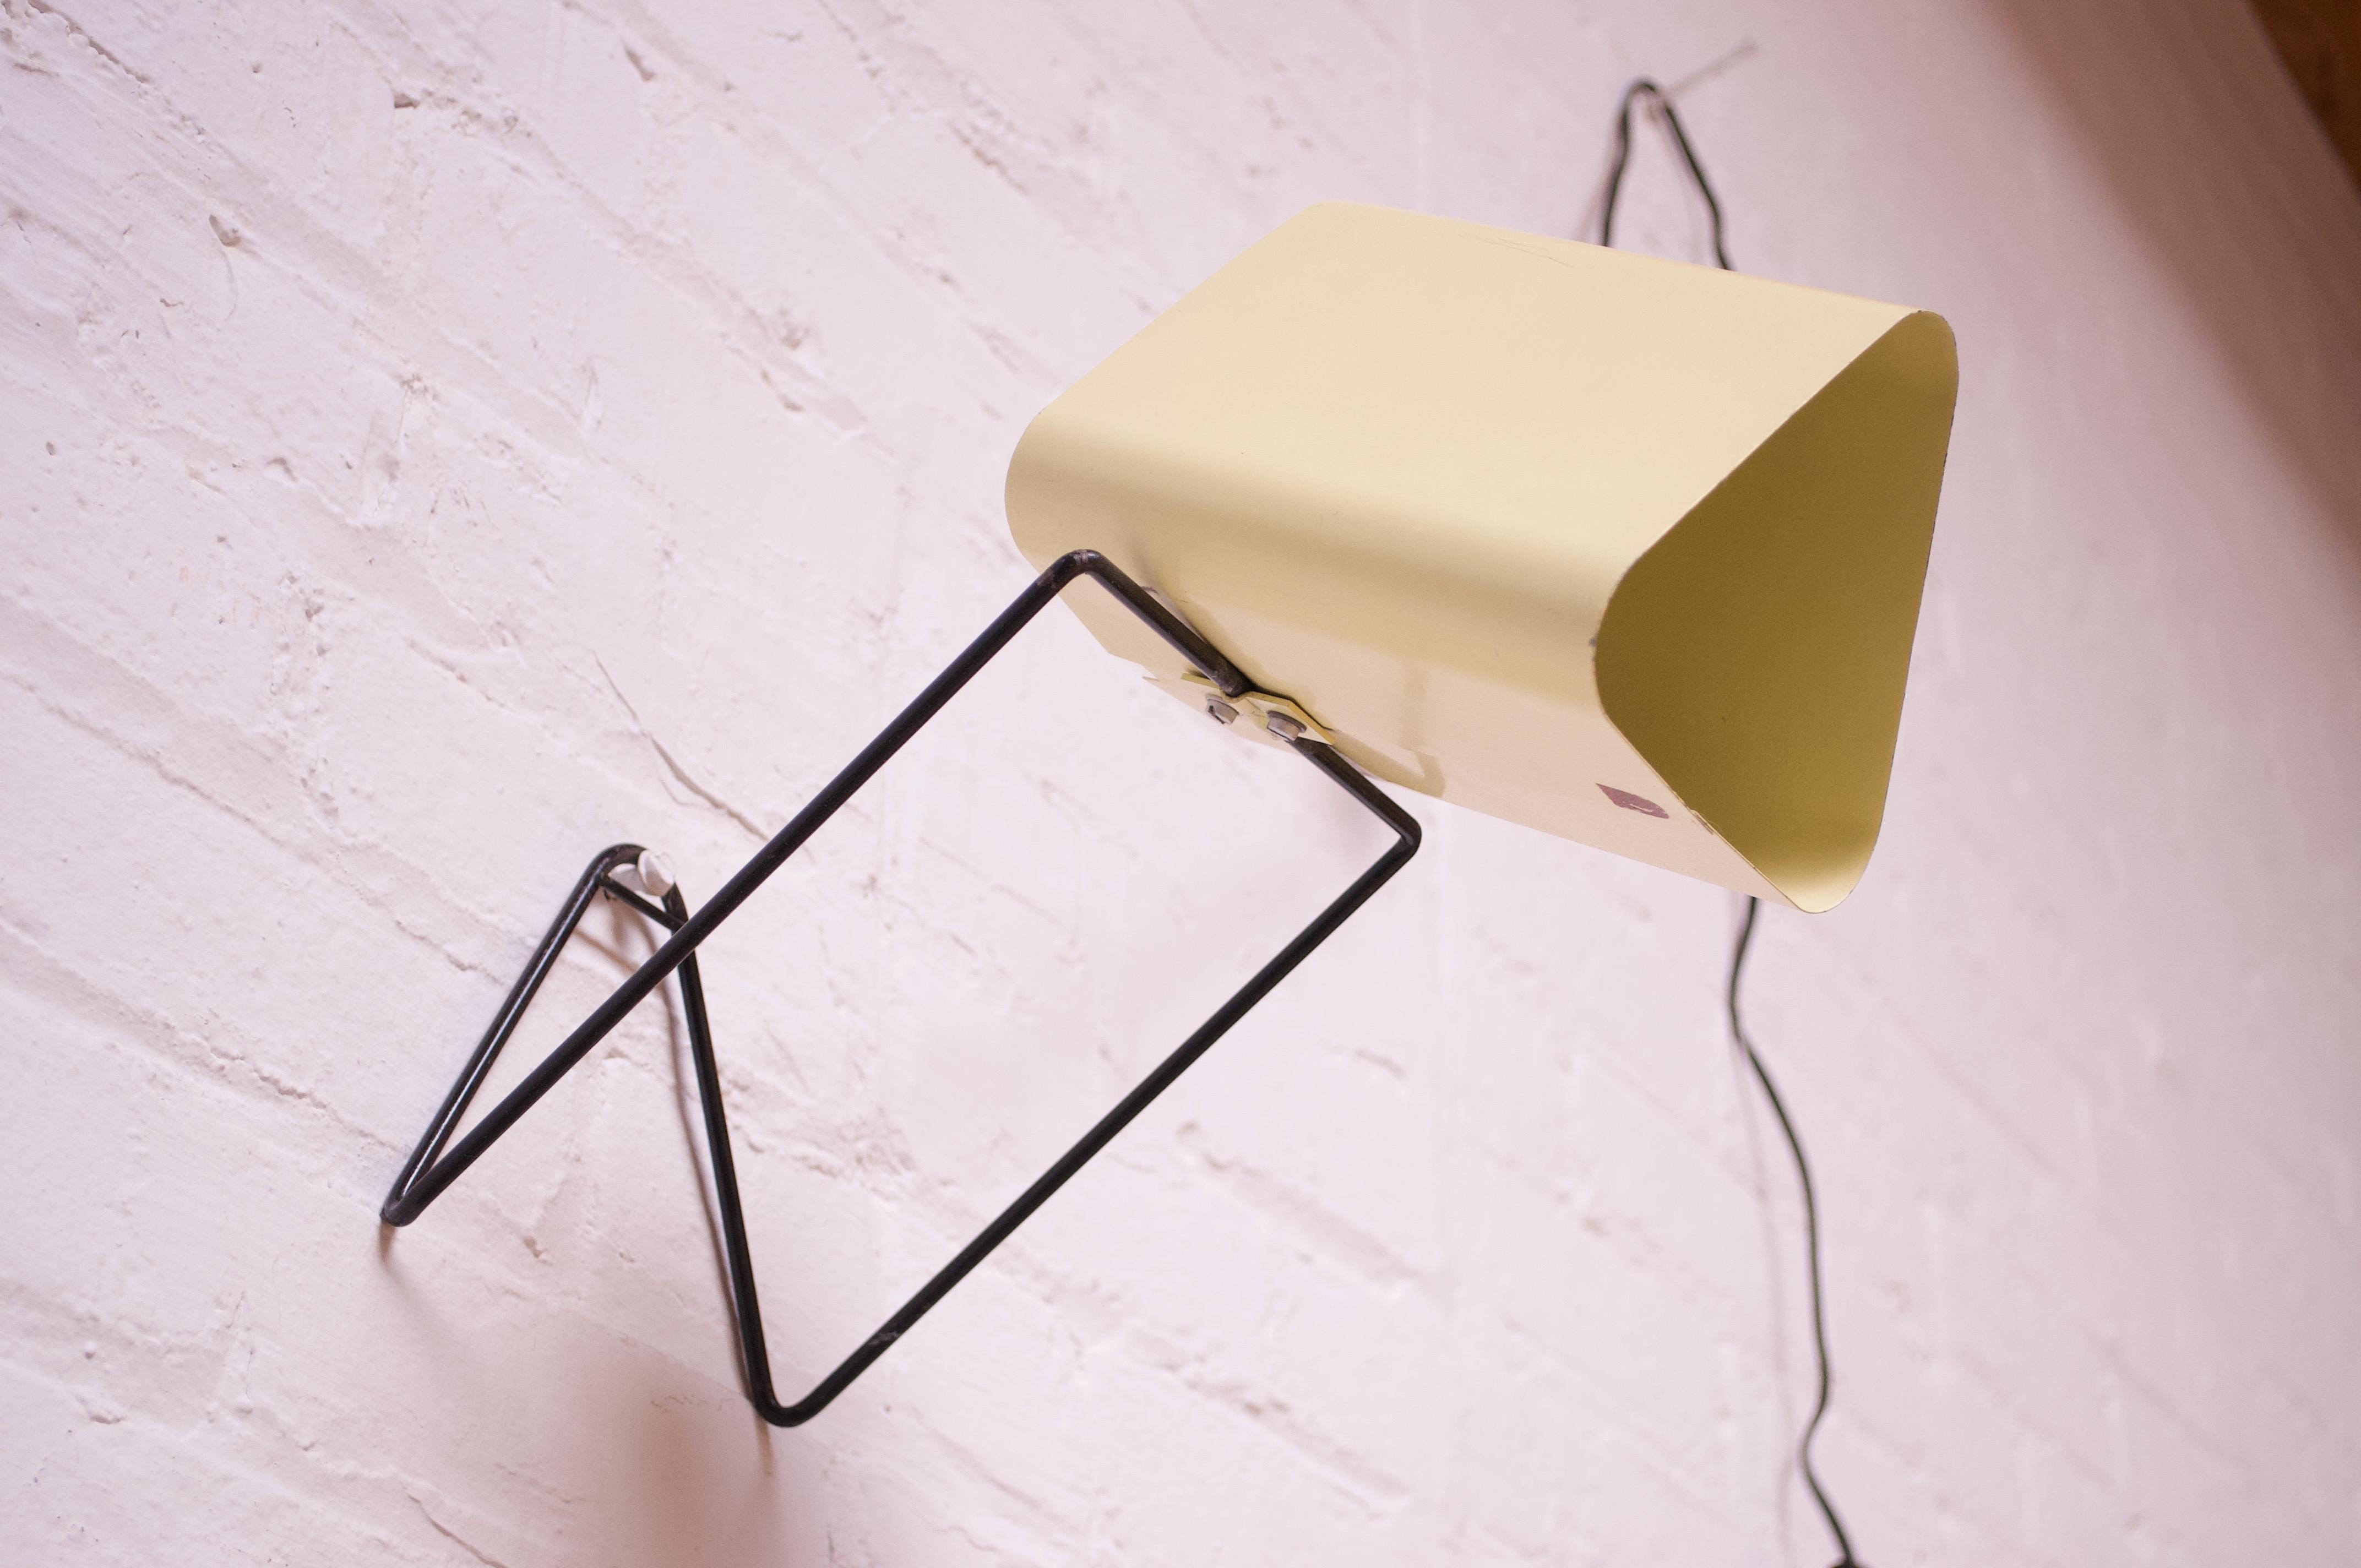 Versatile adjustable Dutch reading / table lamp or wall sconce by Philips (ca. 1950s, Netherlands).
Composed of a soft yellow triangular shade mounted to a painted black metal base with a slot for optional wall mounting. 
Shade is adjustable